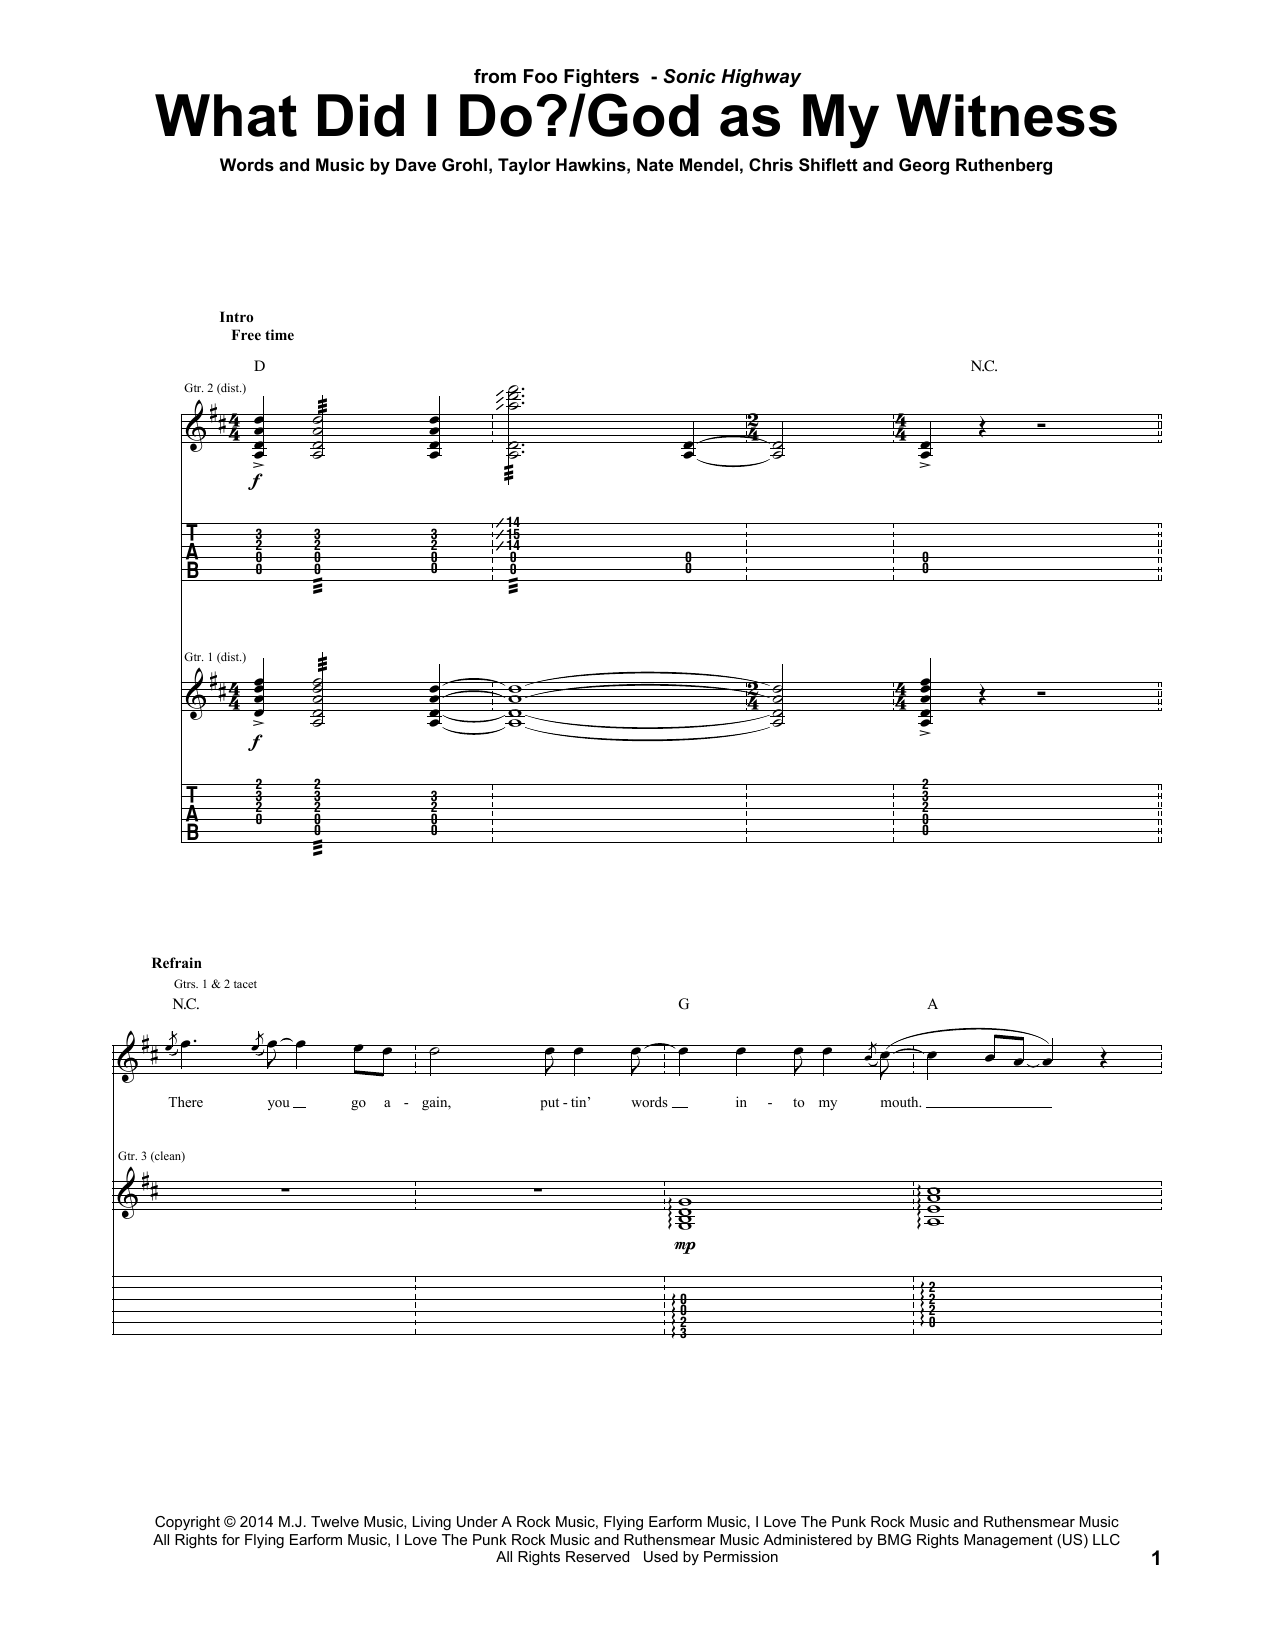 Download Foo Fighters What Did I Do?/God As My Witness Sheet Music